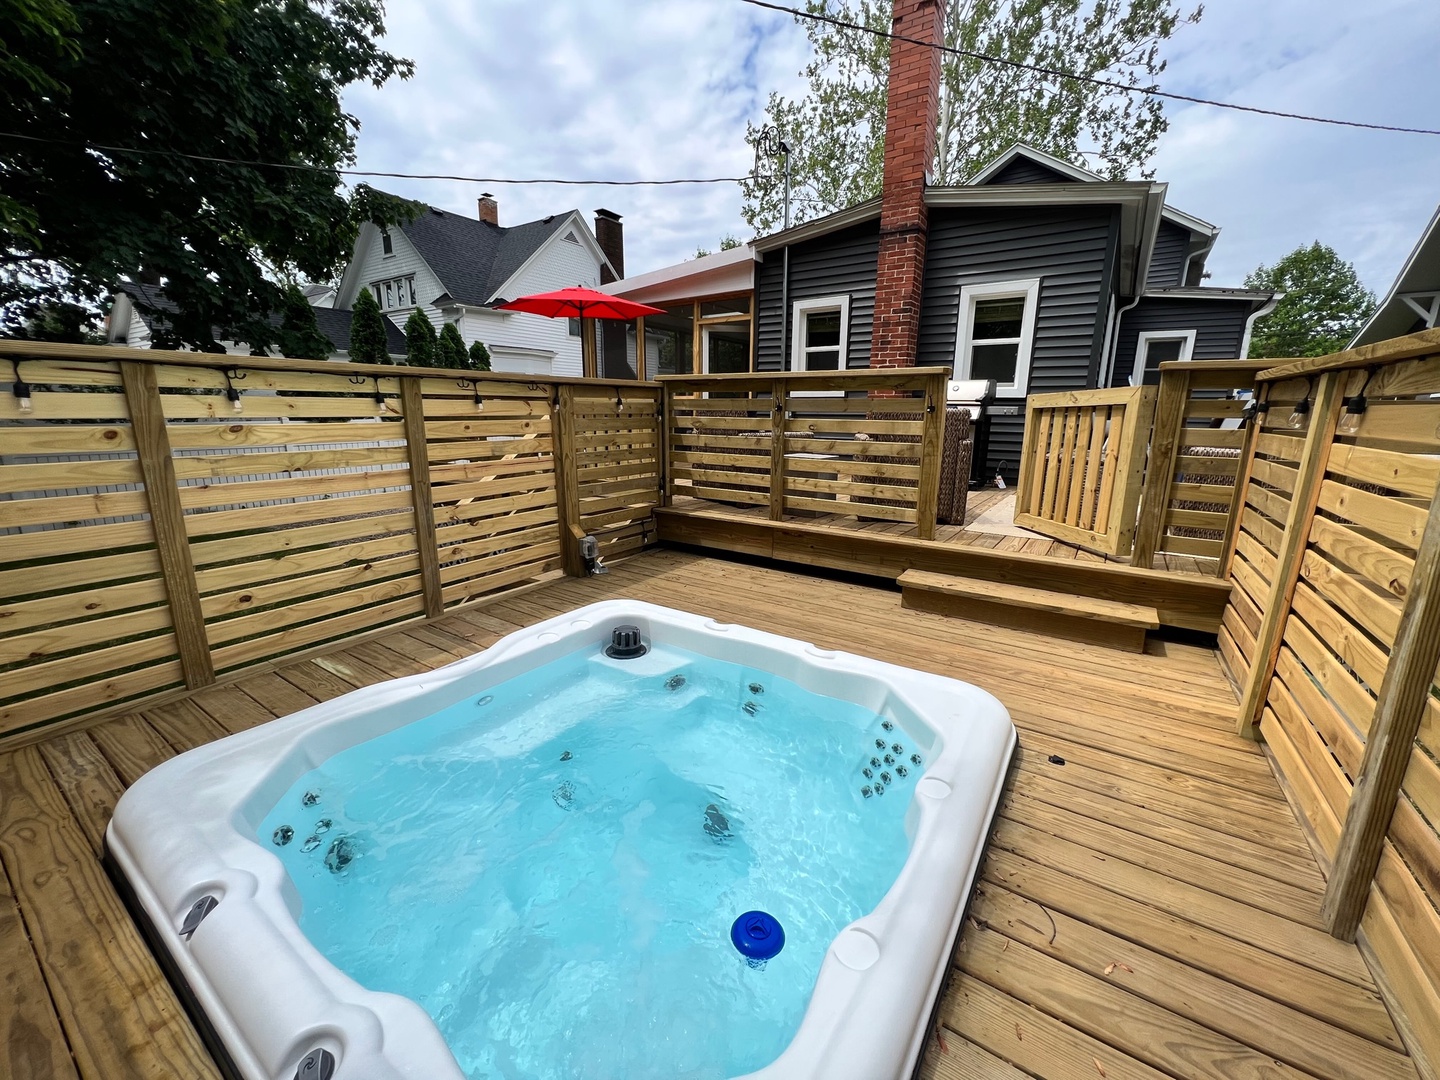 Our private 6-person hot tub is the best spot to relax every evening.